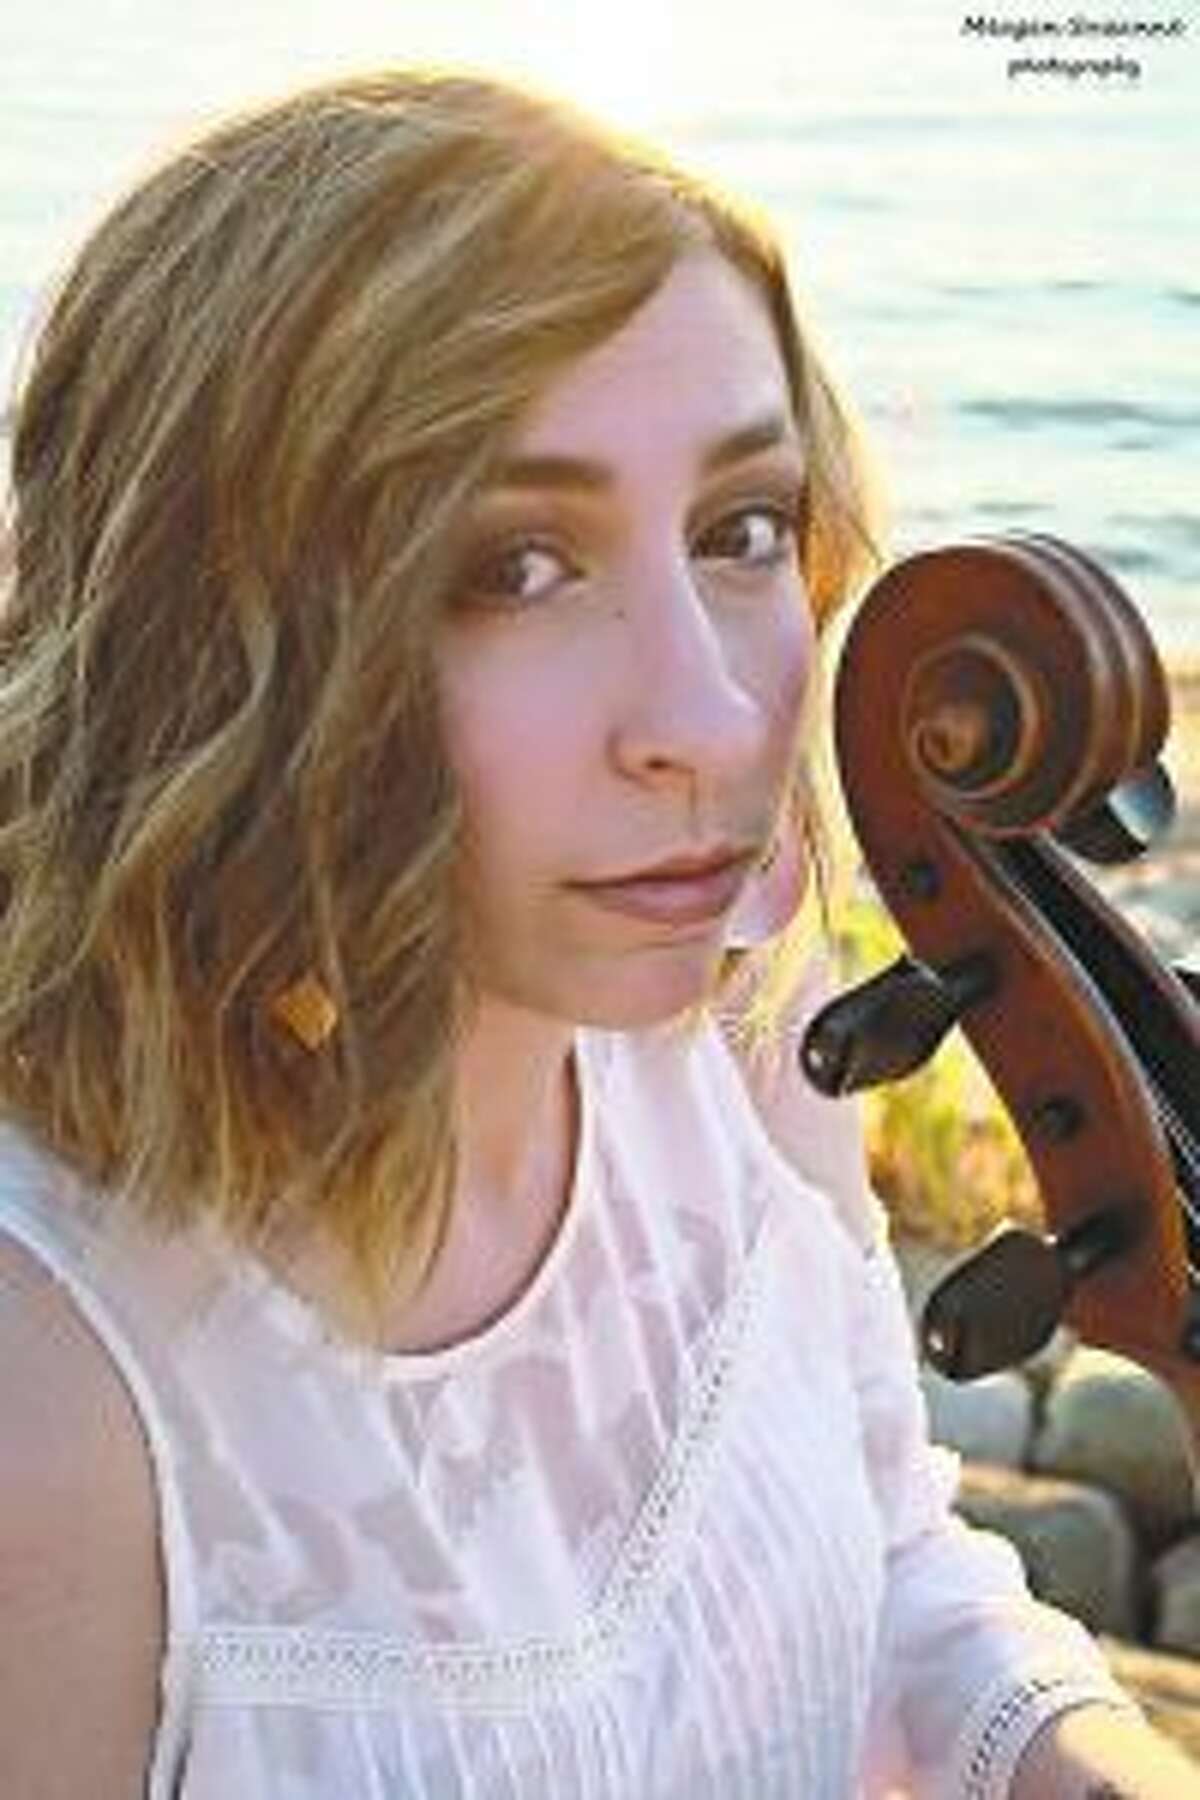 Benzie Area Symphony Orchestra will launch its 2019 summer season at 4 p.m. on Sunday at the Benzie Central High School Auditorium. The event will feature cellist Carrie Brannen. (Courtesy photo)